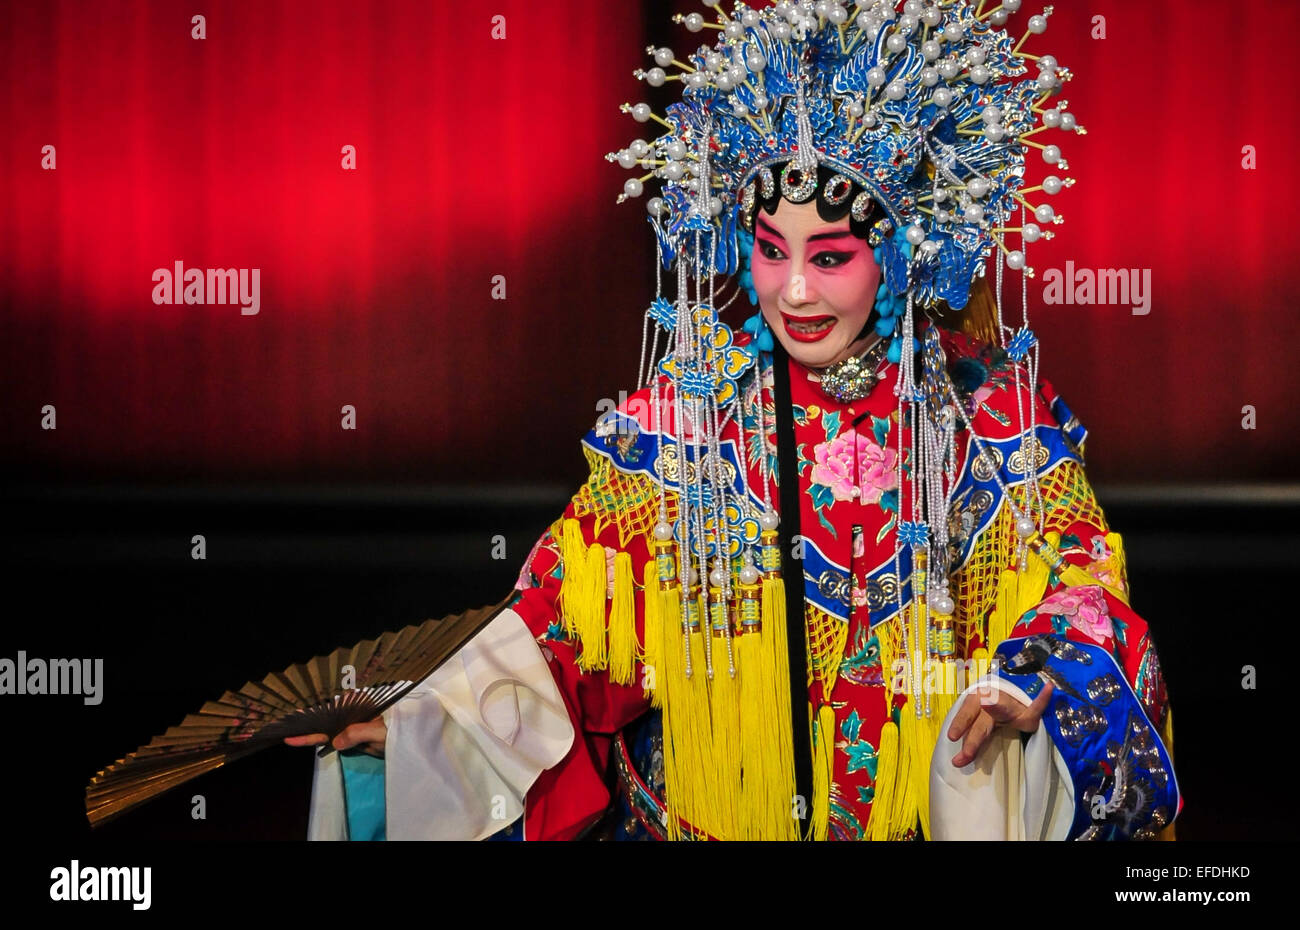 Los Angeles, USA. 1st Feb, 2015. Beijing opera artist of China Sun Ping performs an excerpt from 'The Drunken Beauty', during an Chinese Lunar New Year Celebration in Wallis Annenberg Center for the Performing Arts in Los Angeles, the United States, Feb. 1, 2015. © Zhang Chaoqun/Xinhua/Alamy Live News Stock Photo